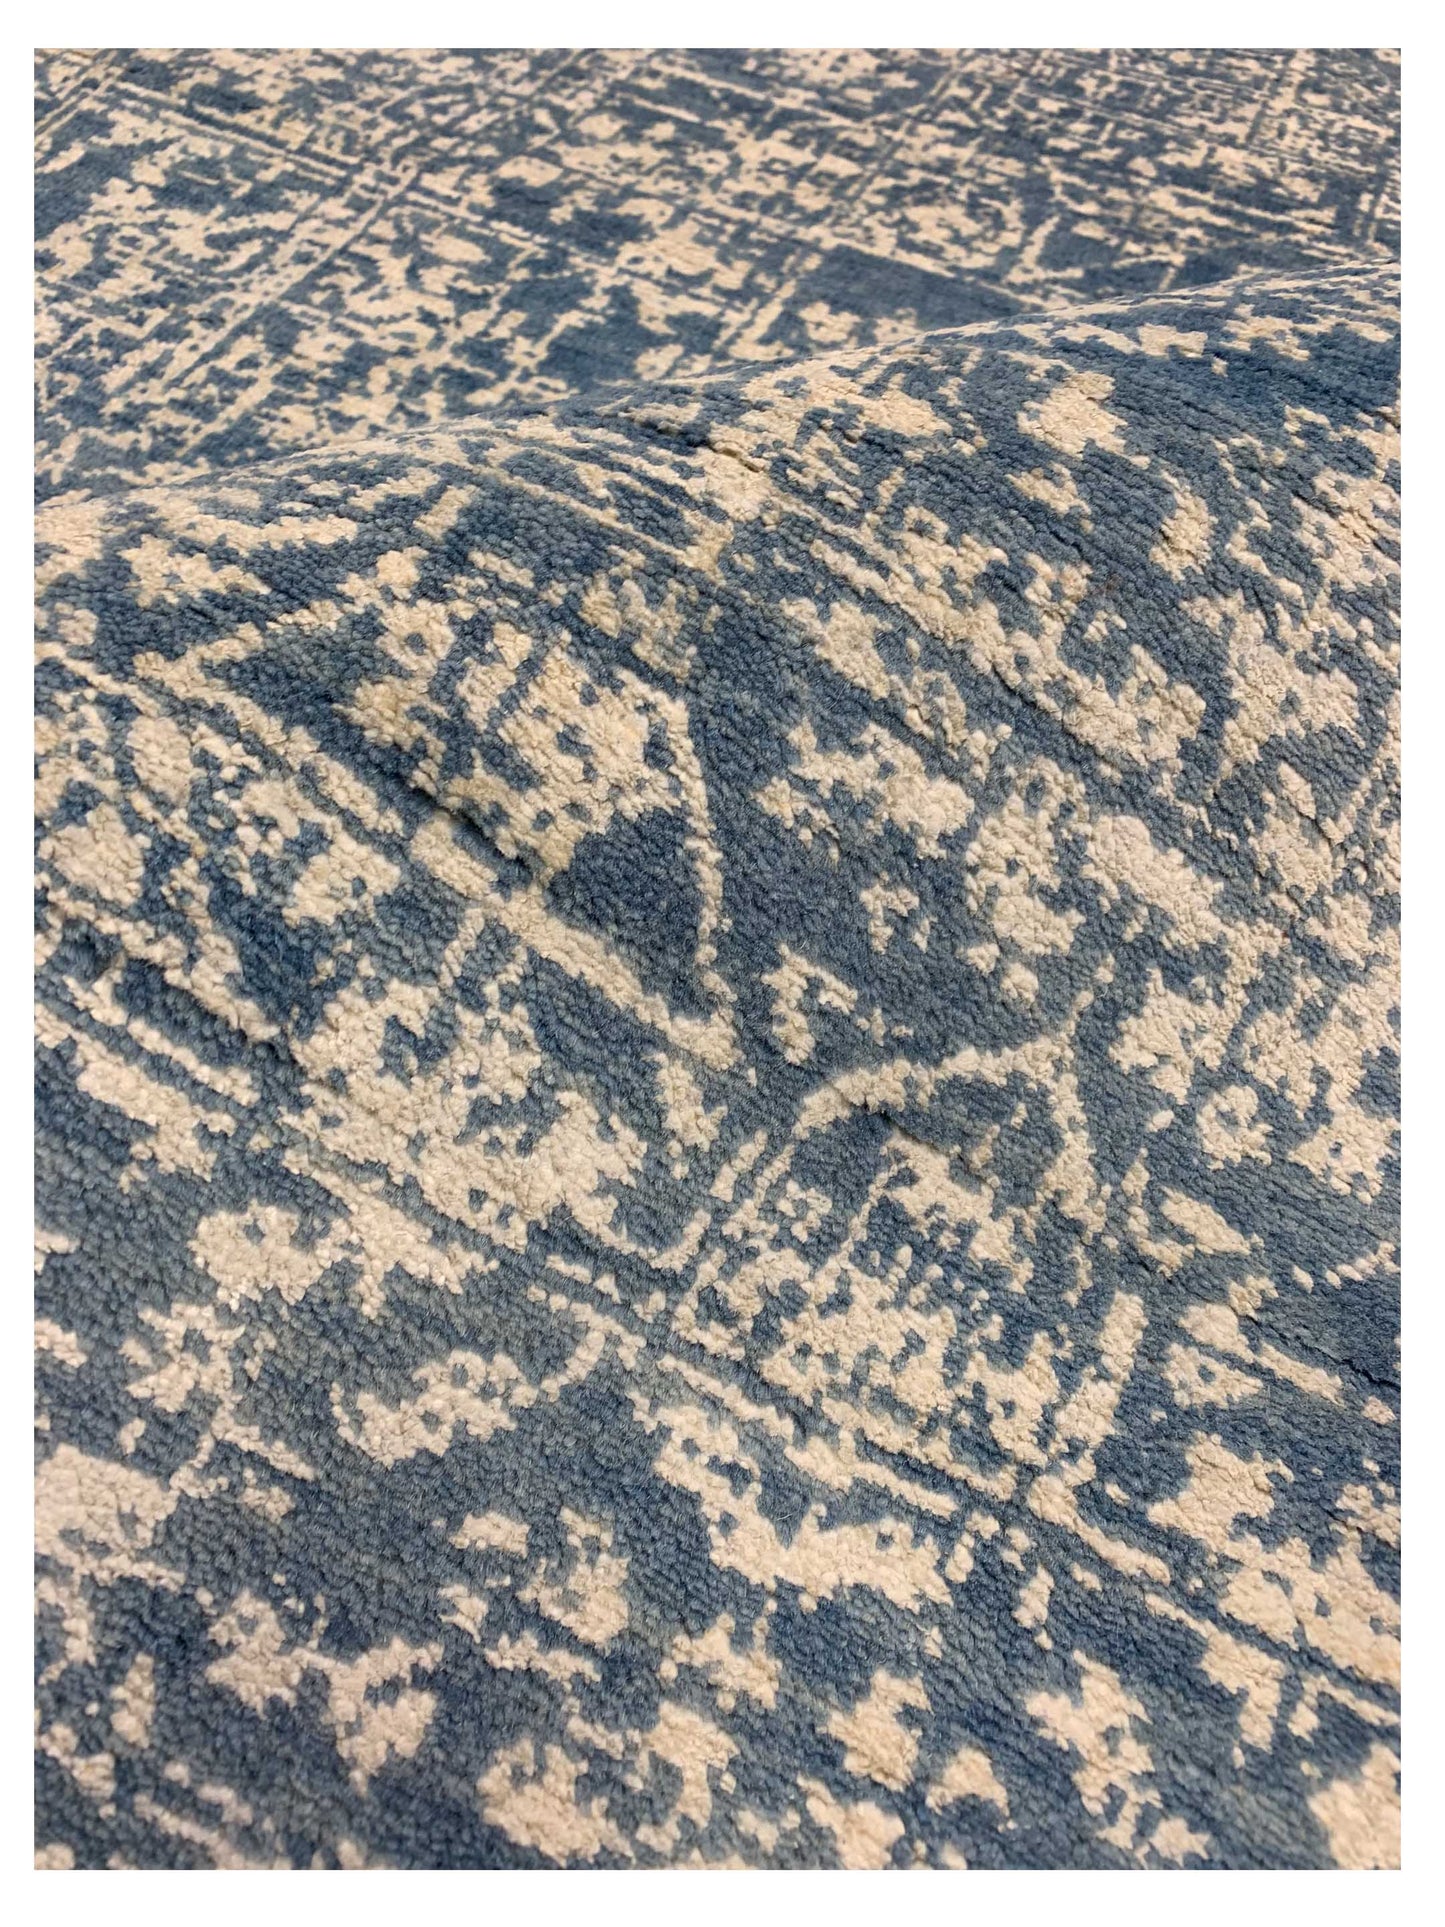 Artisan Adele  Silver Blue Transitional Knotted Rug